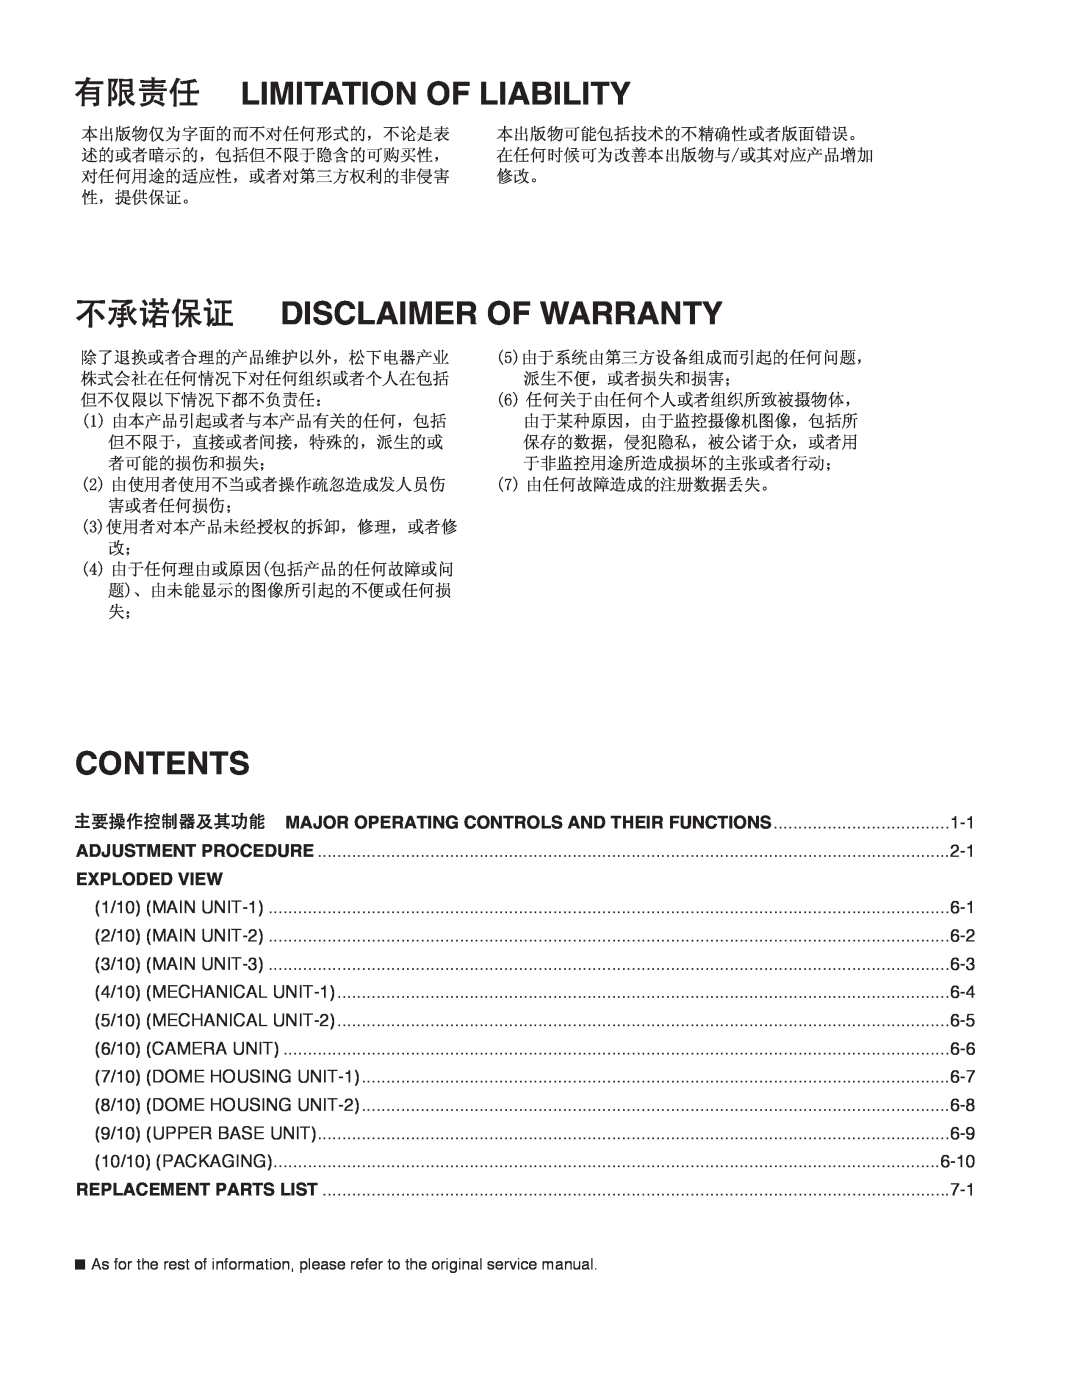 Panasonic WV-NW960 Limitation Of Liability, Disclaimer Of Warranty, Contents, Major Operating Controls And Their Functions 